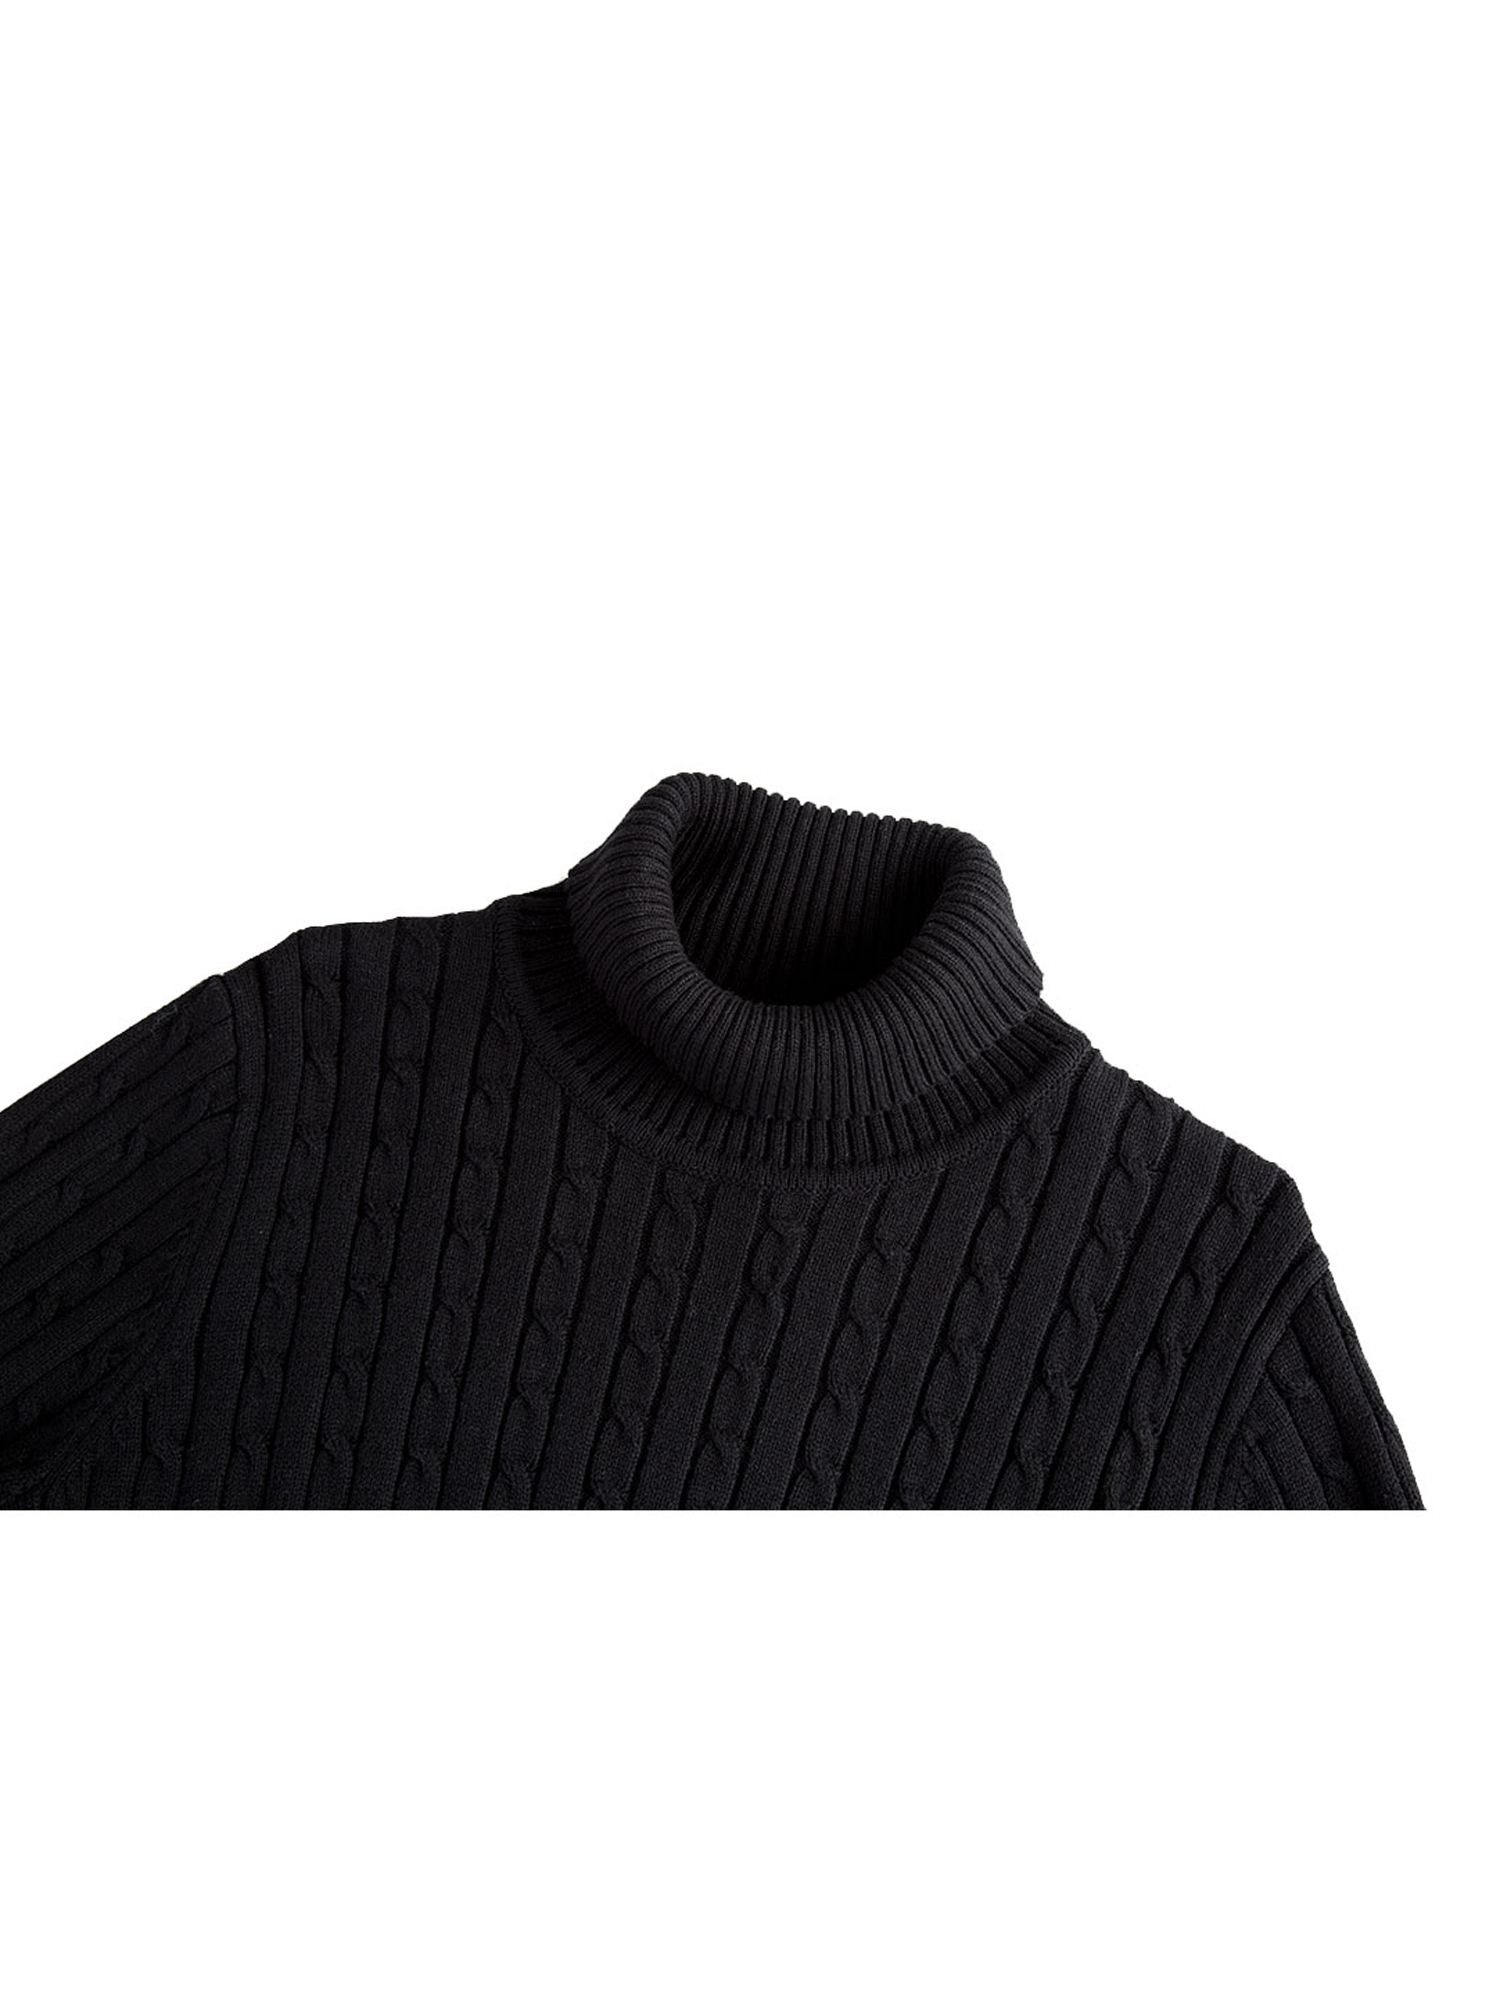 Unique Bargains Men's Turtleneck Long Sleeves Pullover Cable Knit Sweater - image 4 of 7